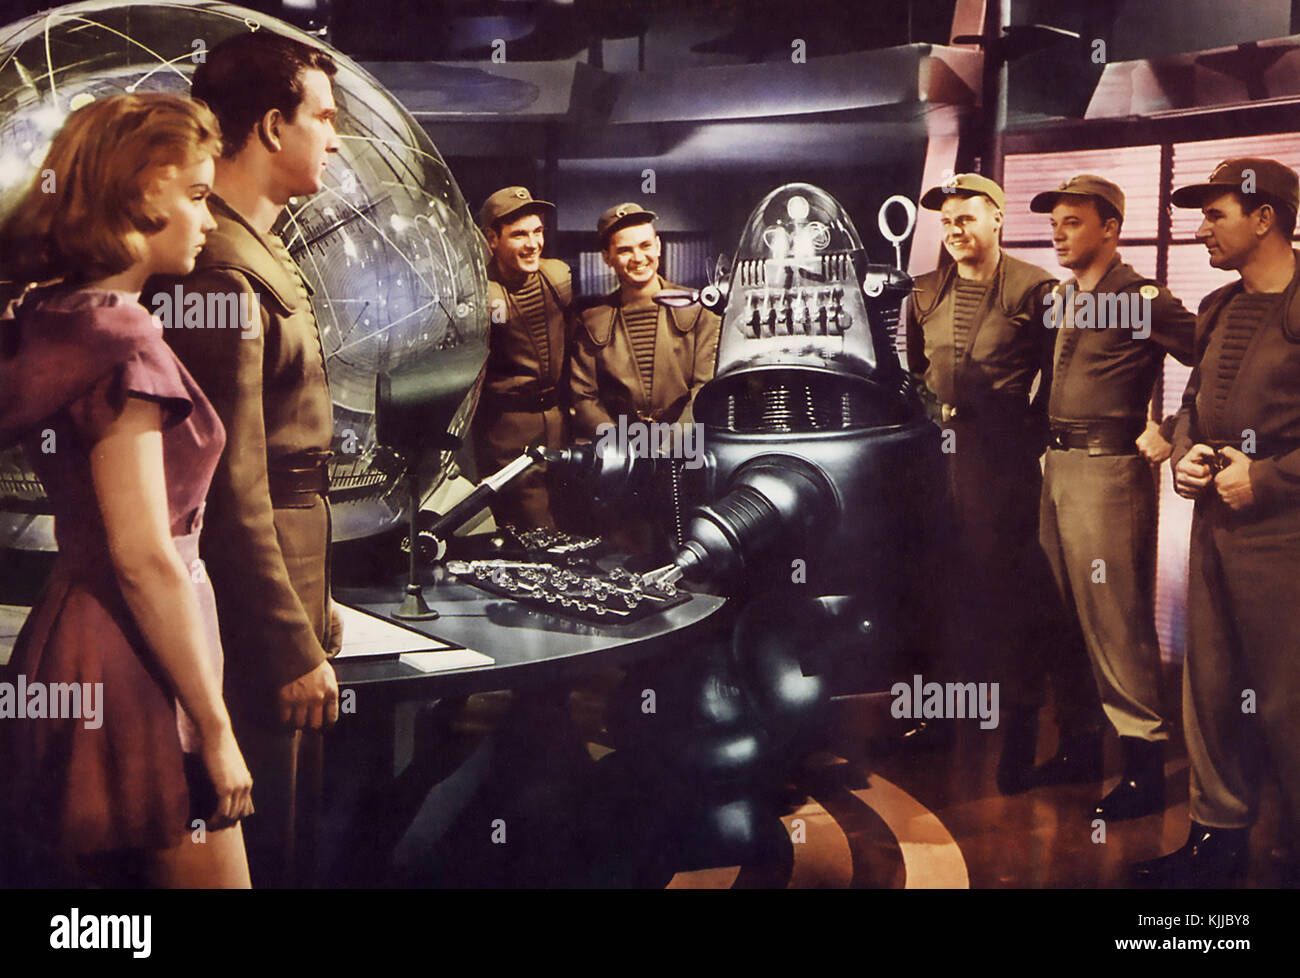 Forbidden Planet (1956) -- (Movie Clip) This Planetary Force - Turner  Classic Movies